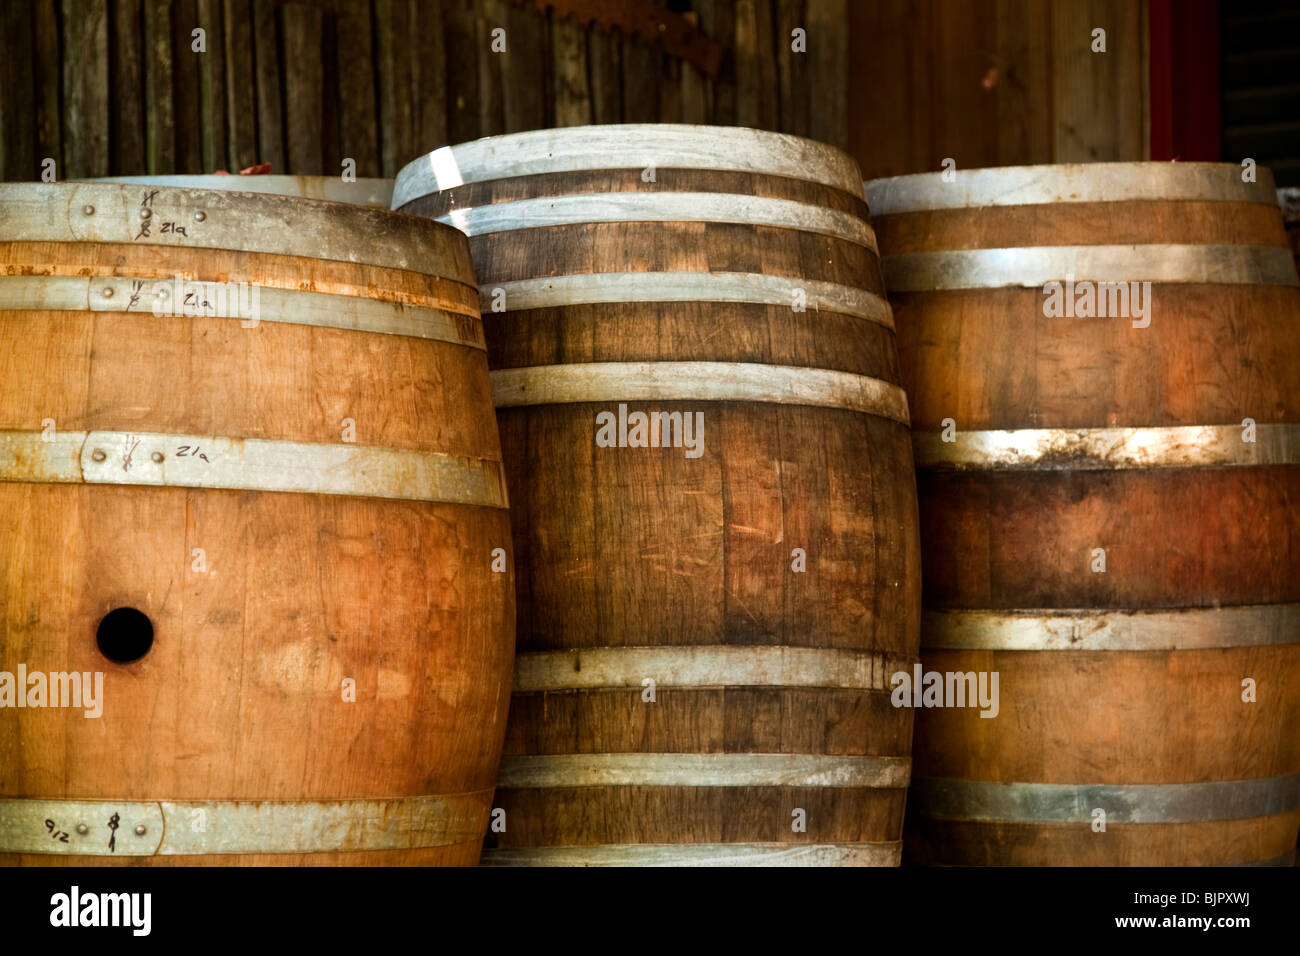 Wine casks in cellar at winery, Hawke's Bay, New Zealand Stock Photo